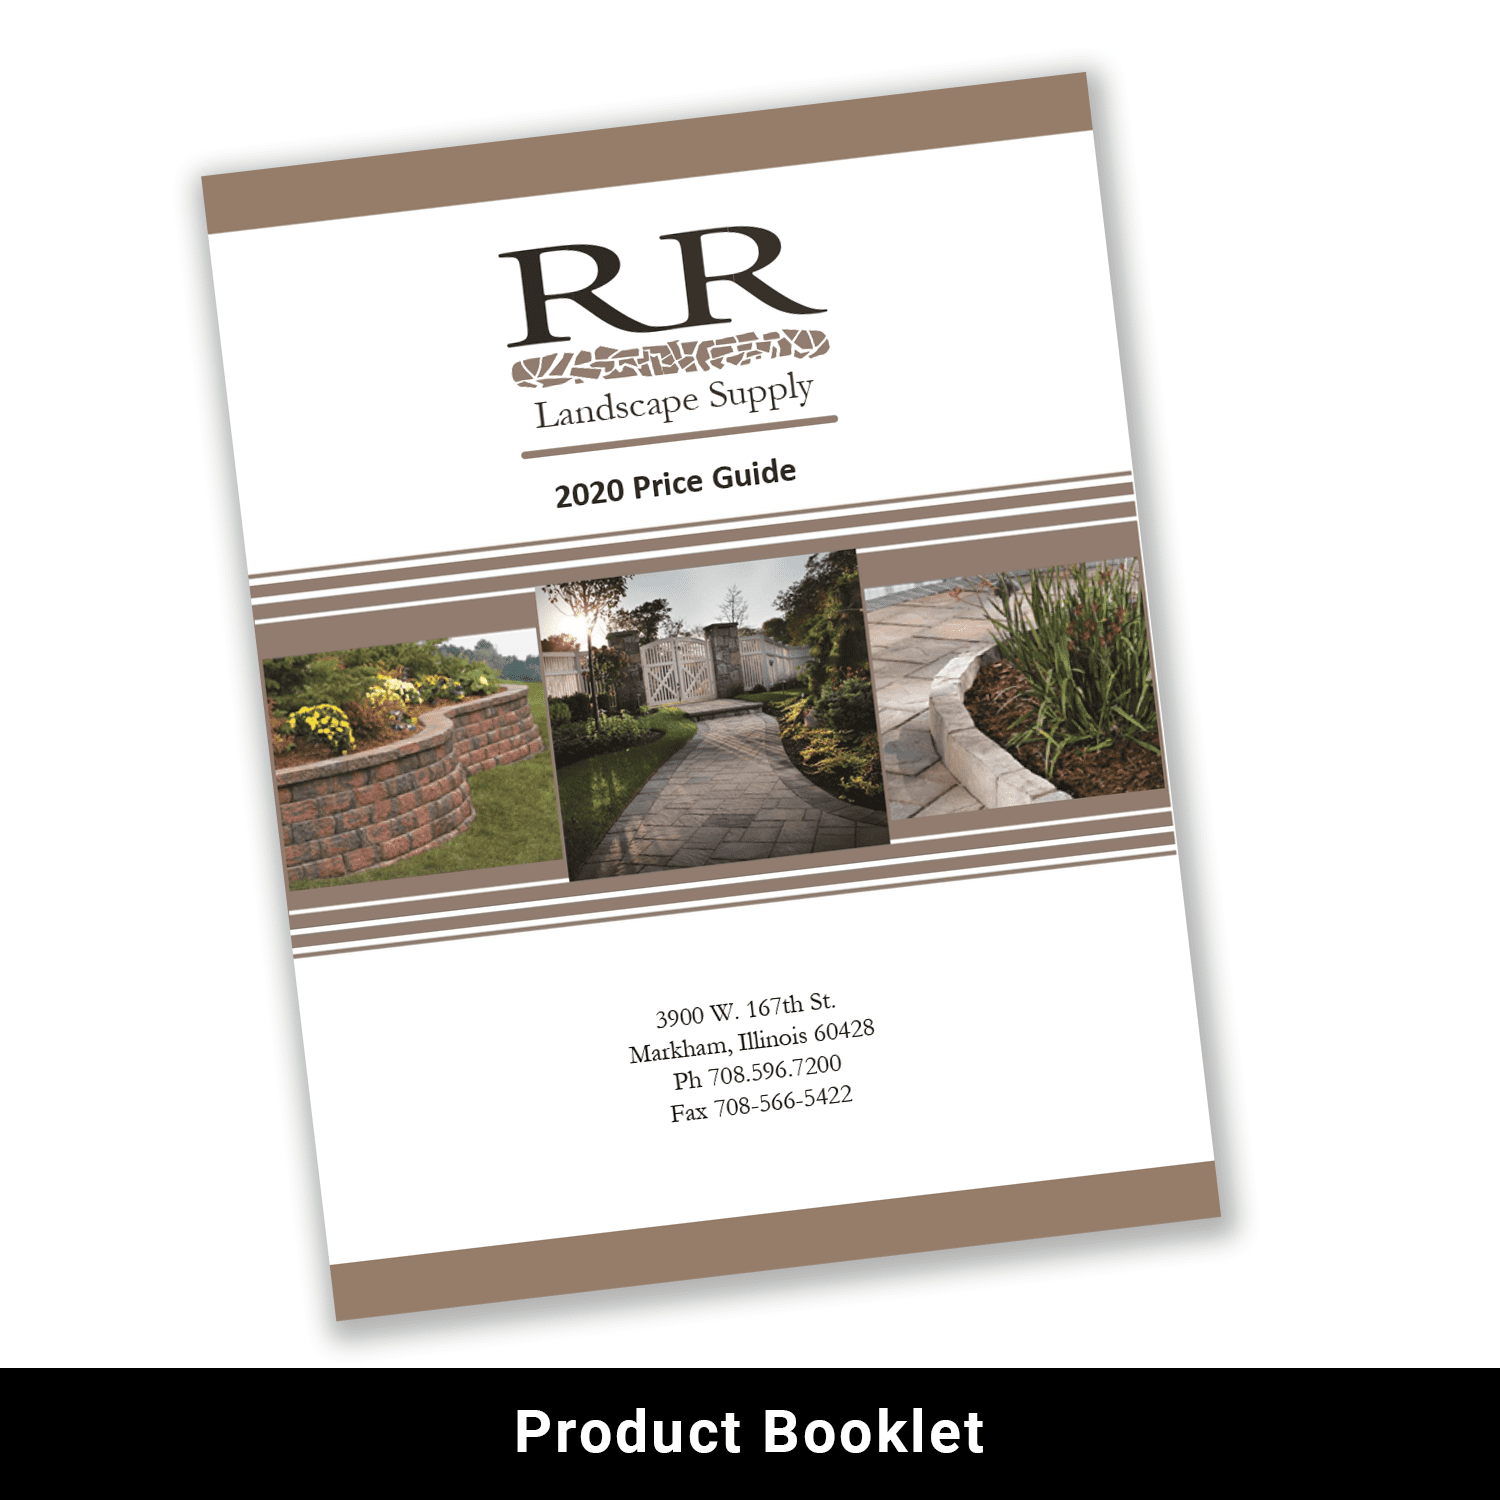 Print product booklet example